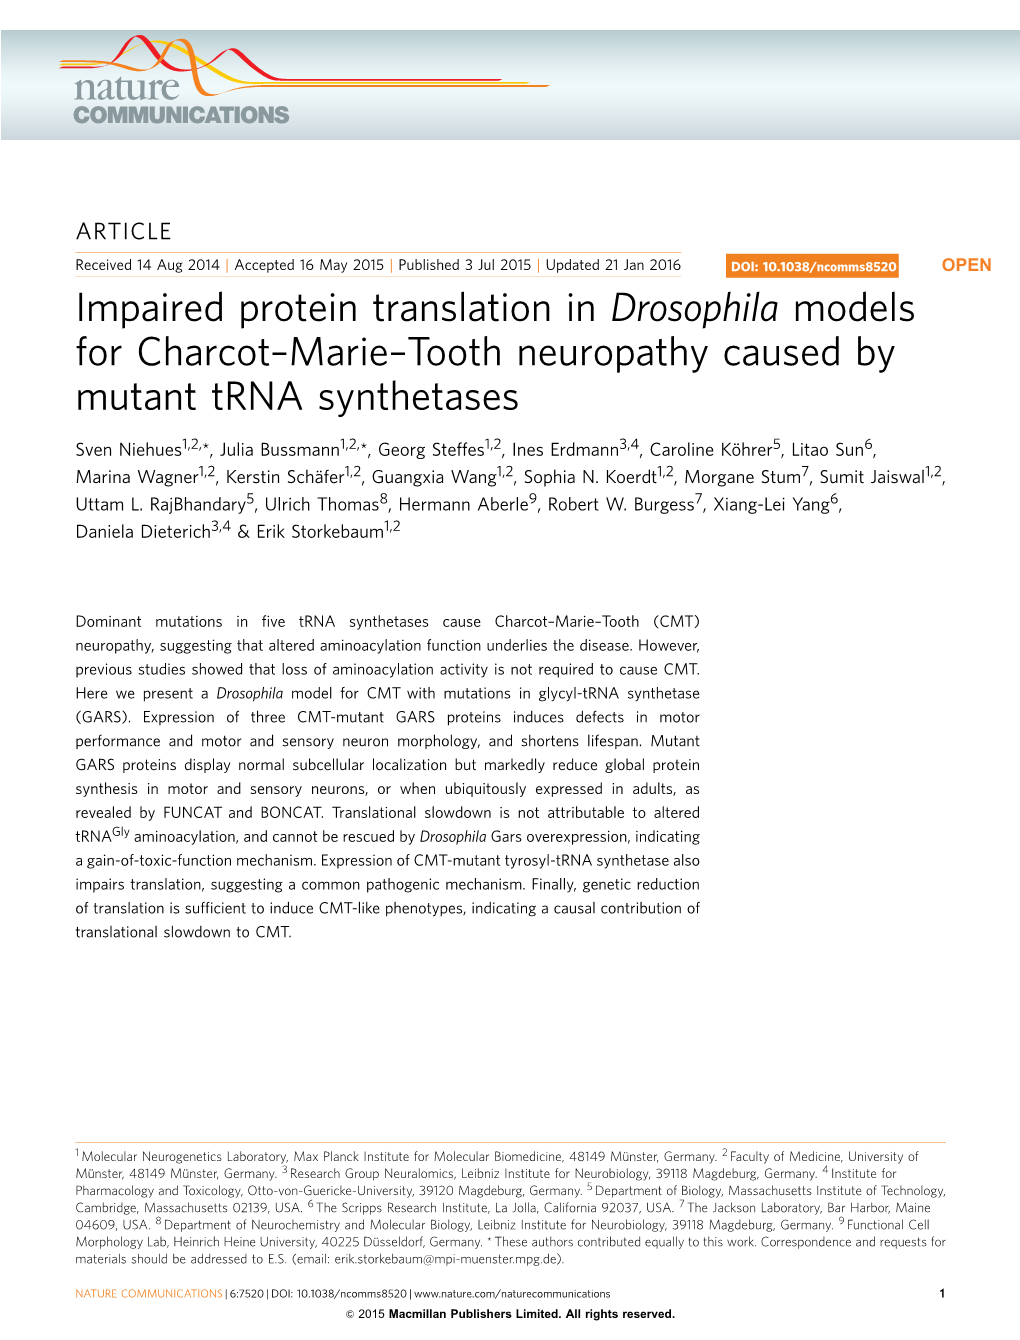 Impaired Protein Translation in Drosophila Models for Charcot–Marie–Tooth Neuropathy Caused by Mutant Trna Synthetases